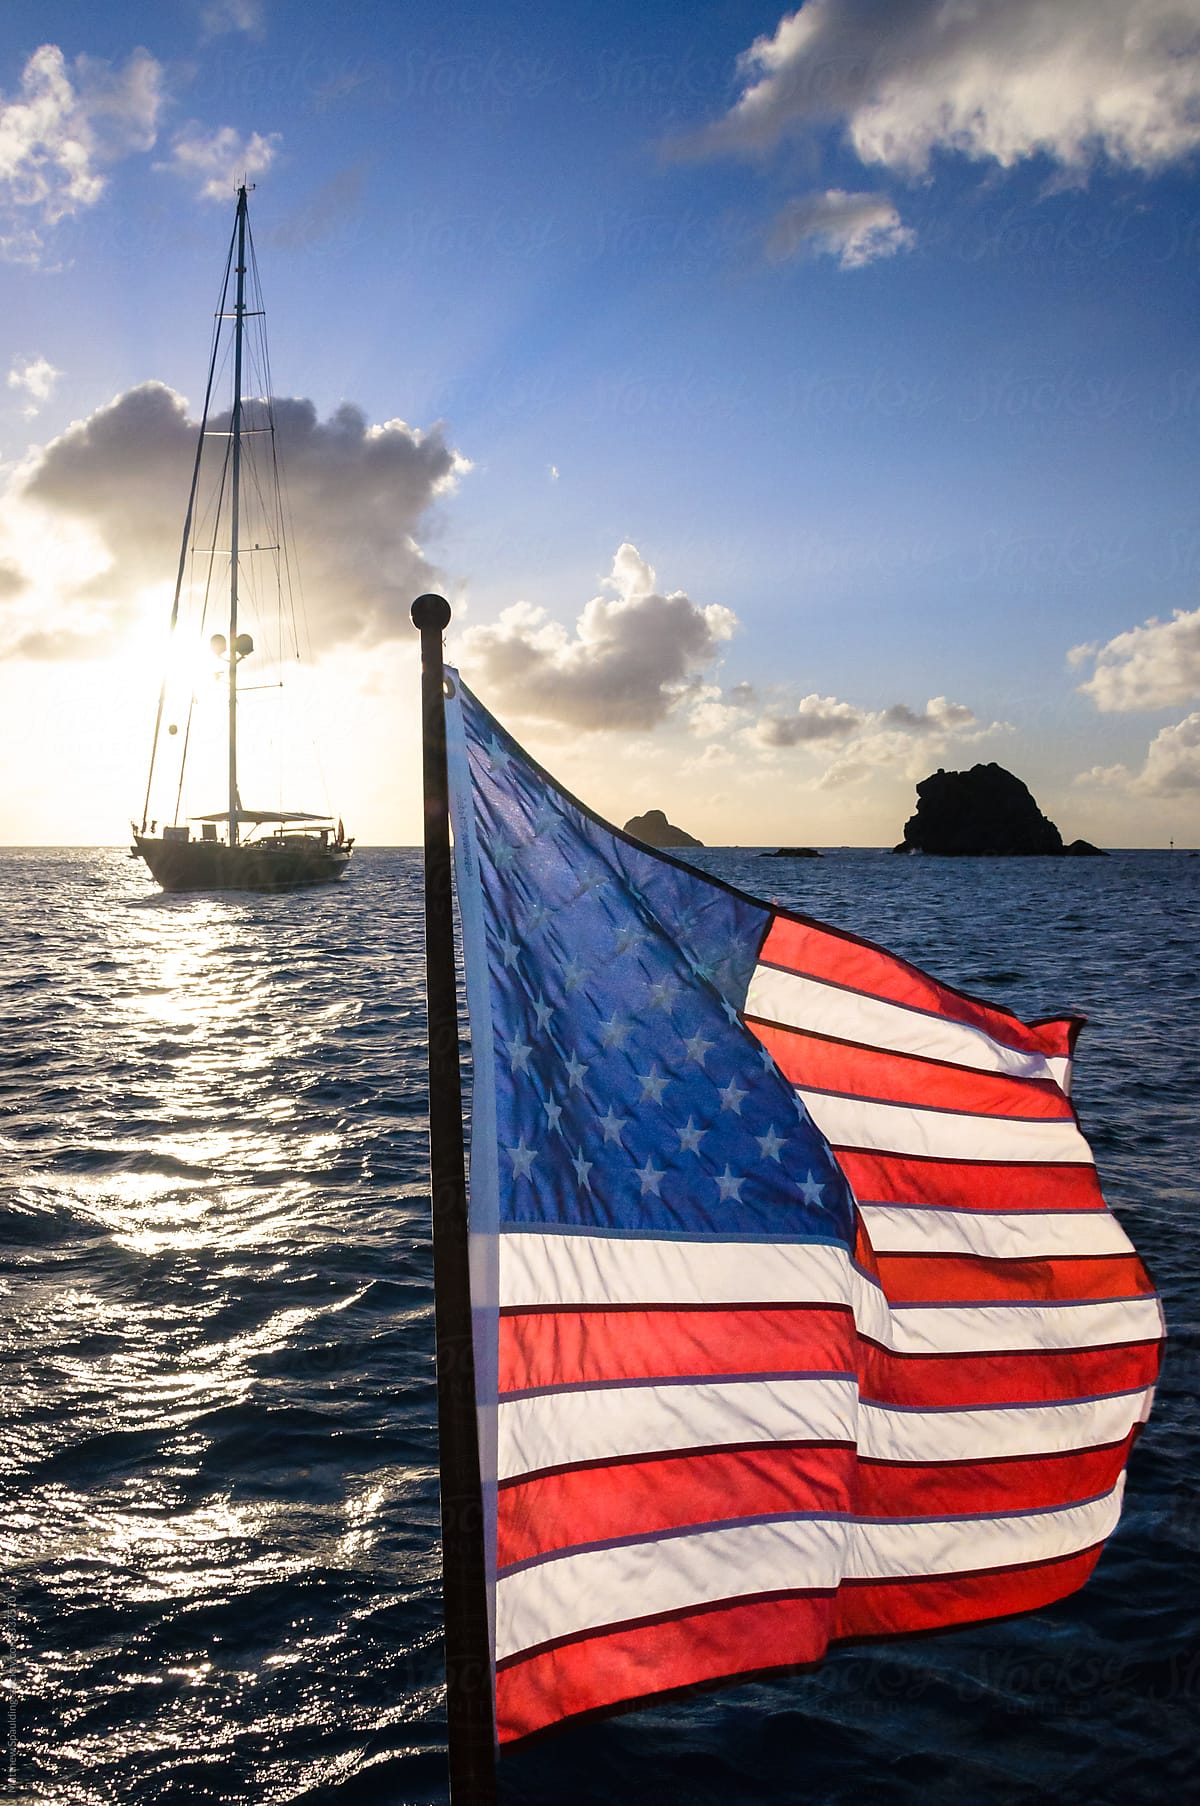 American flag flying in wind with sailboat on ocean during summer sunset